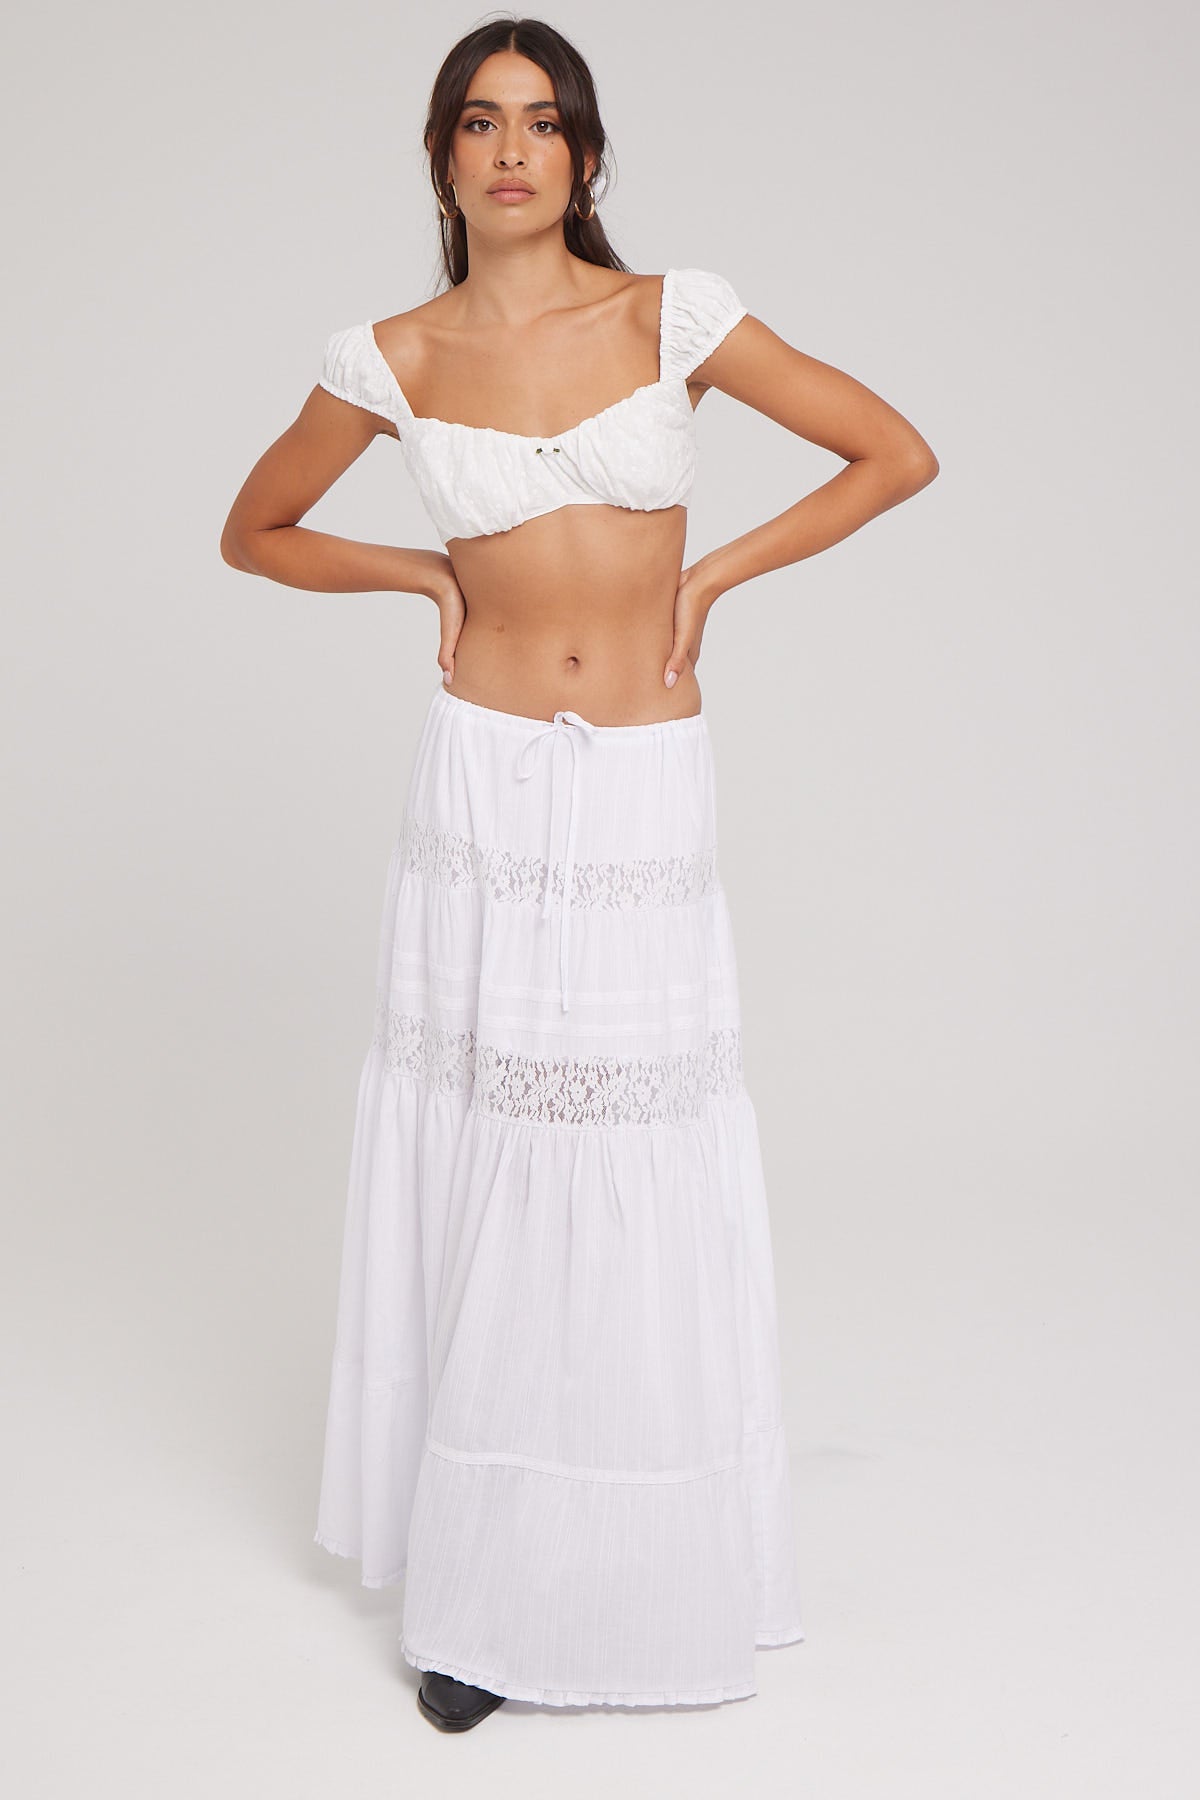 Luck & Trouble Virginia Lace Maxi Skirt White